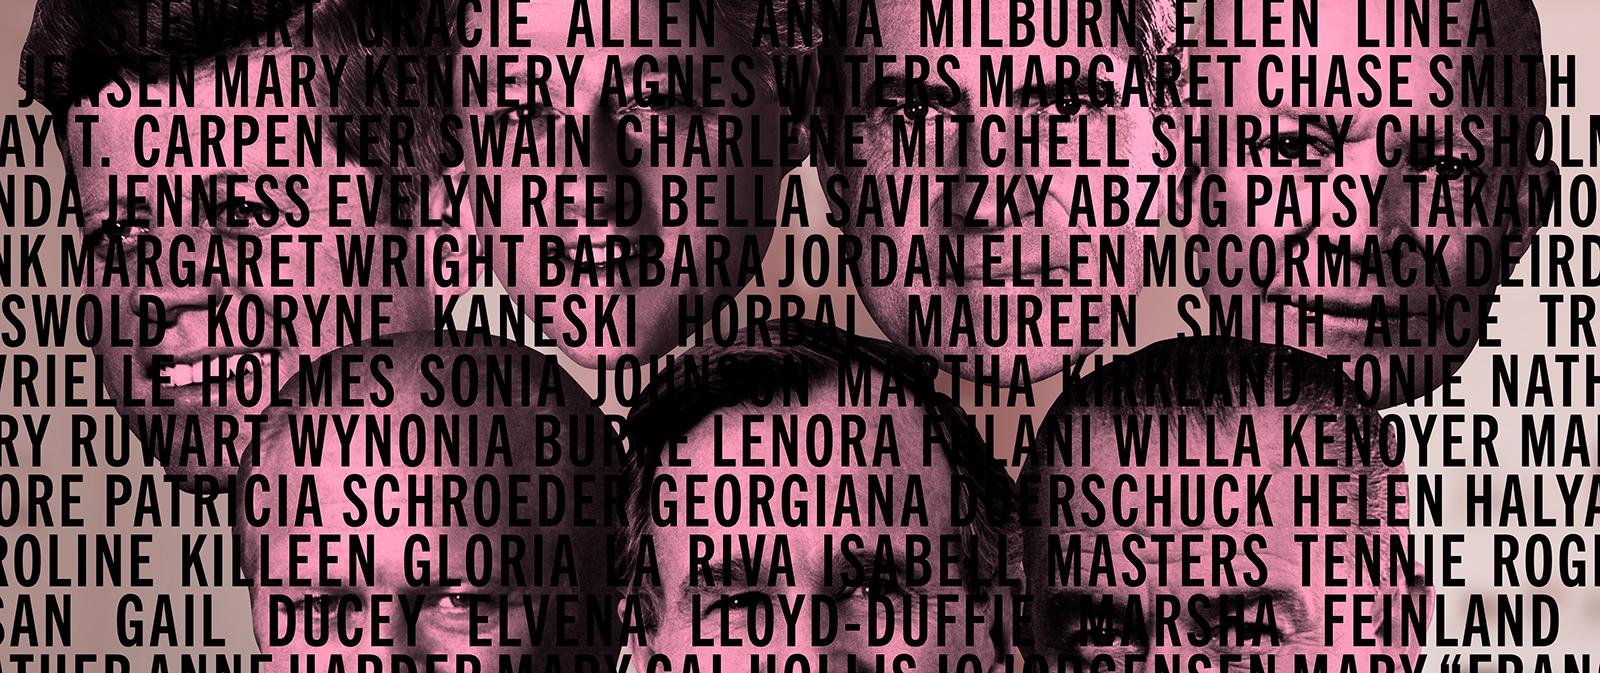 Past presidents faces in pink with black text of women's names